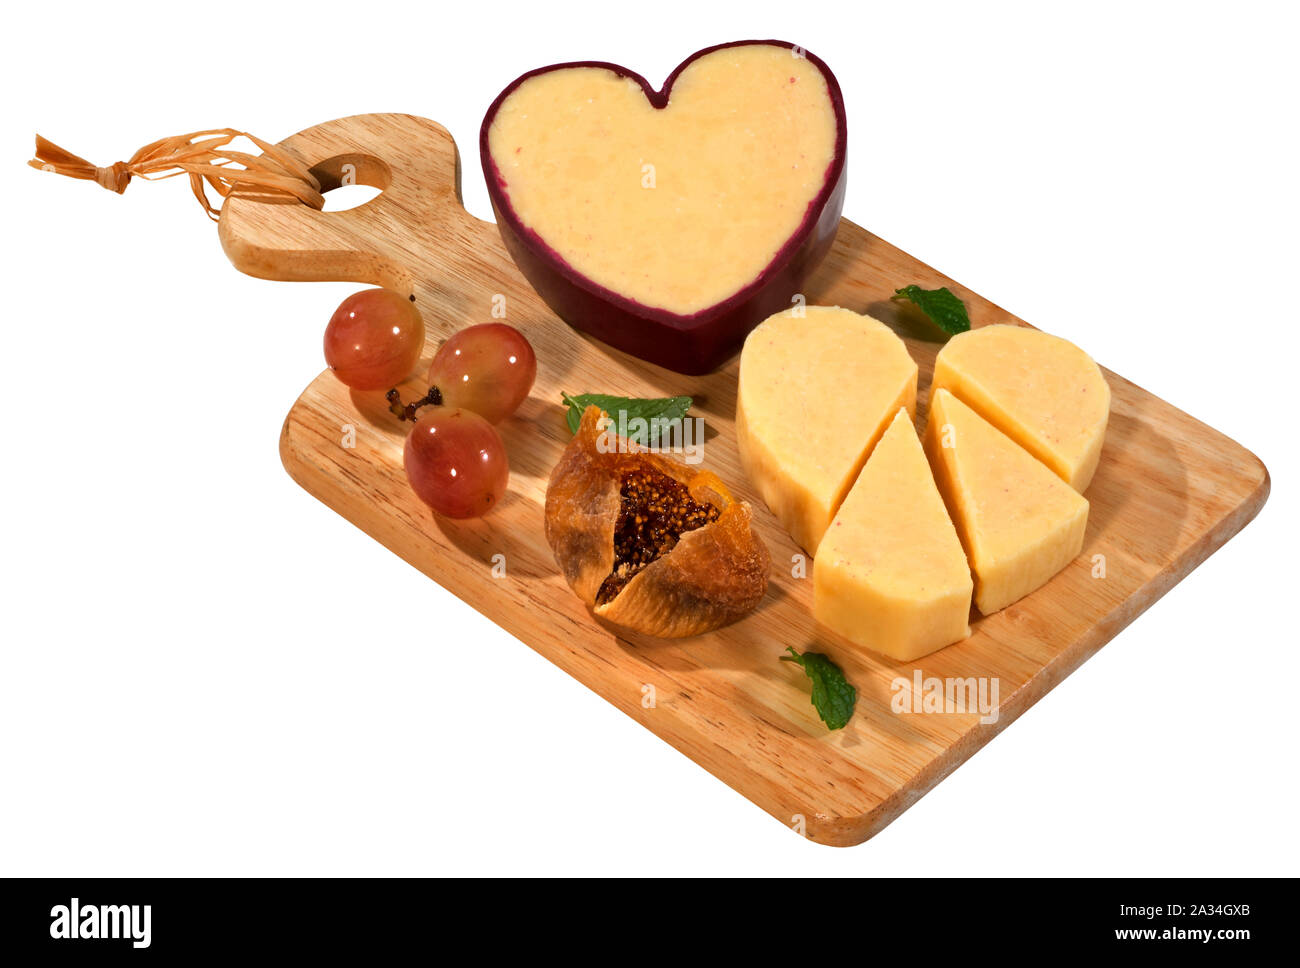 Cheddar Cheese in heart shape Stock Photo